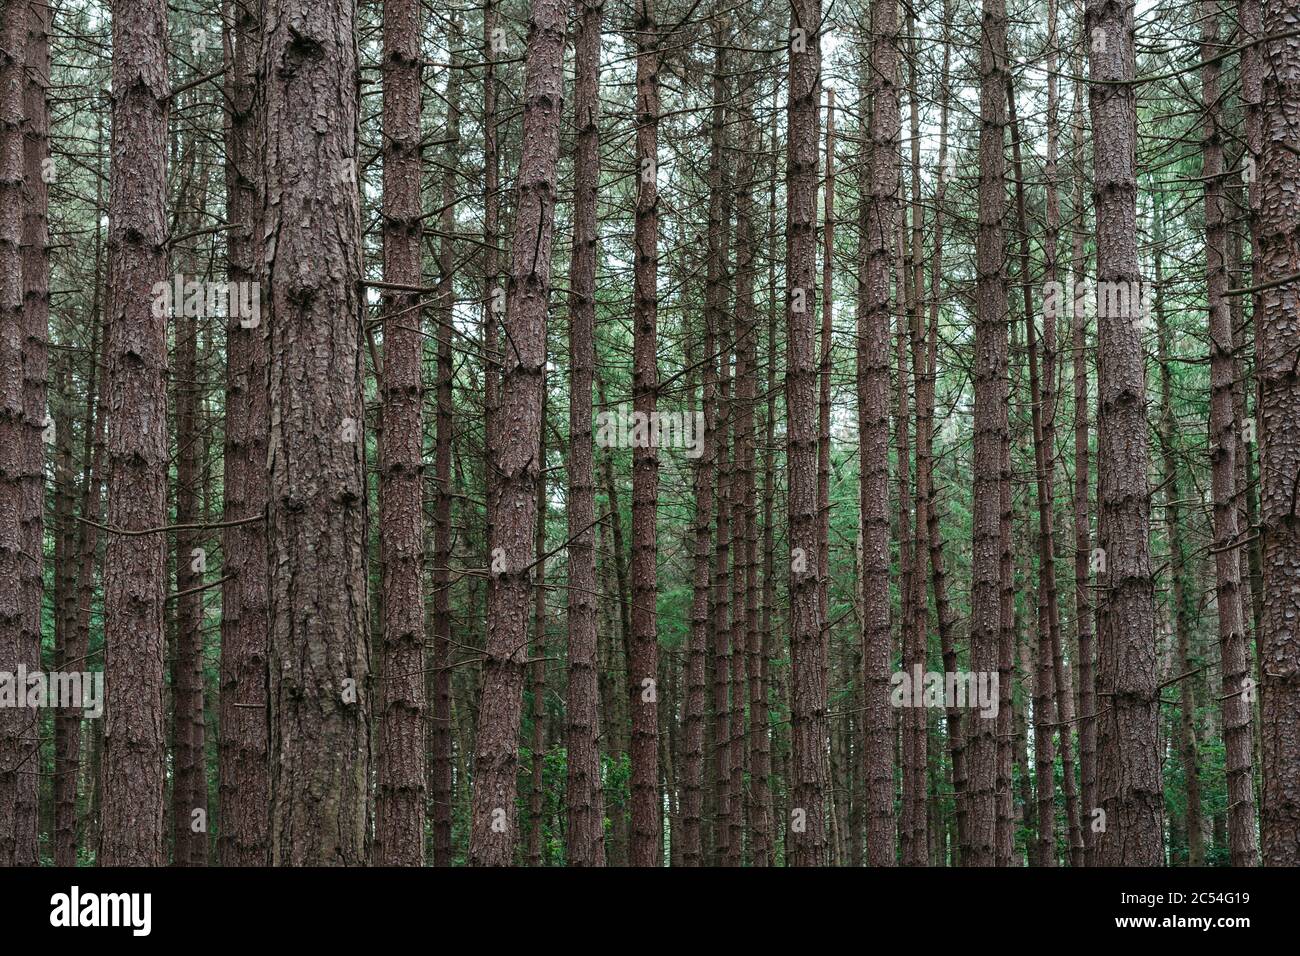 Picture made in pine forest Stock Photo